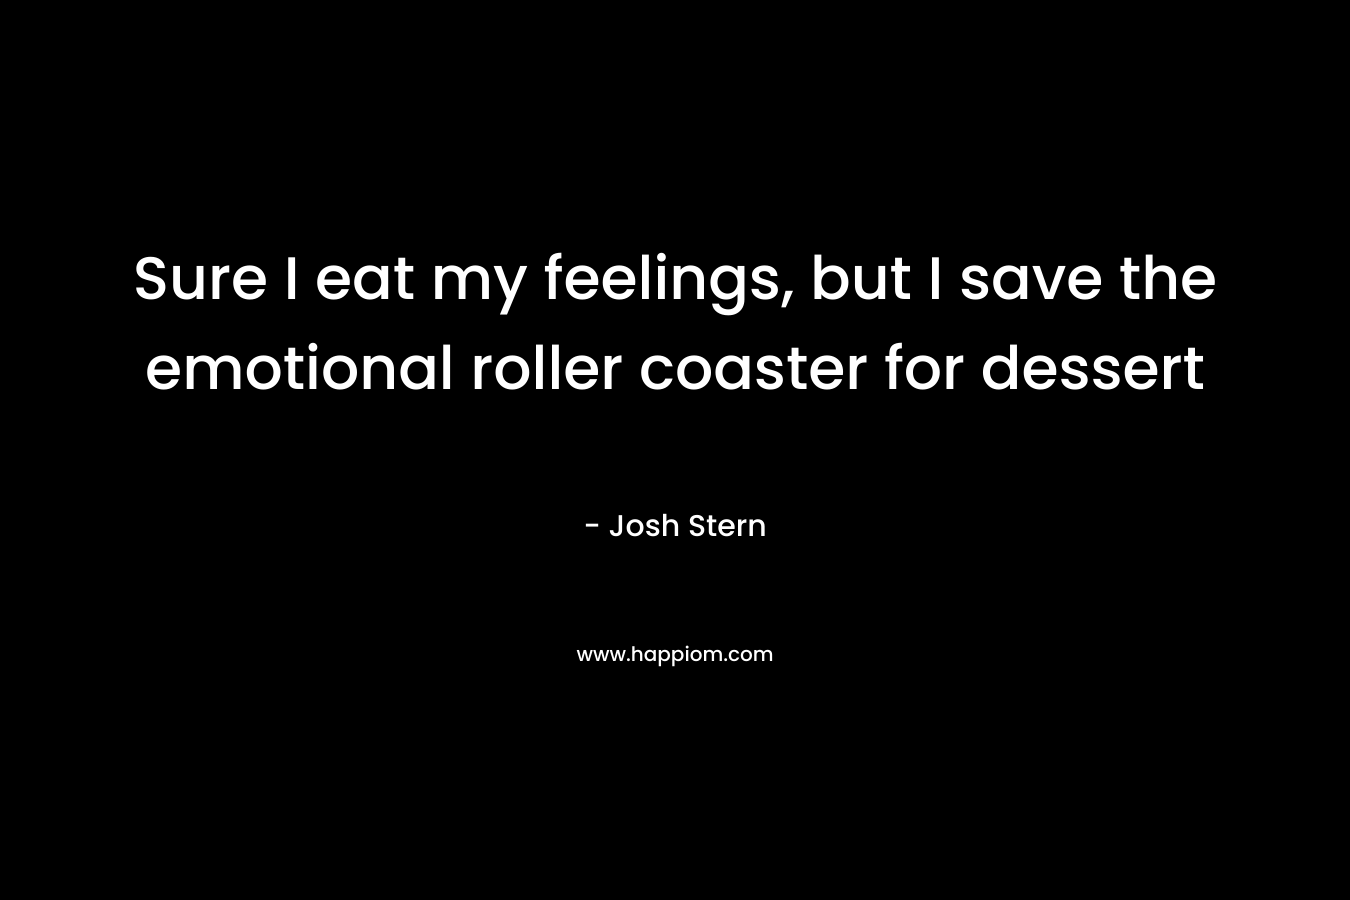 Sure I eat my feelings, but I save the emotional roller coaster for dessert – Josh Stern